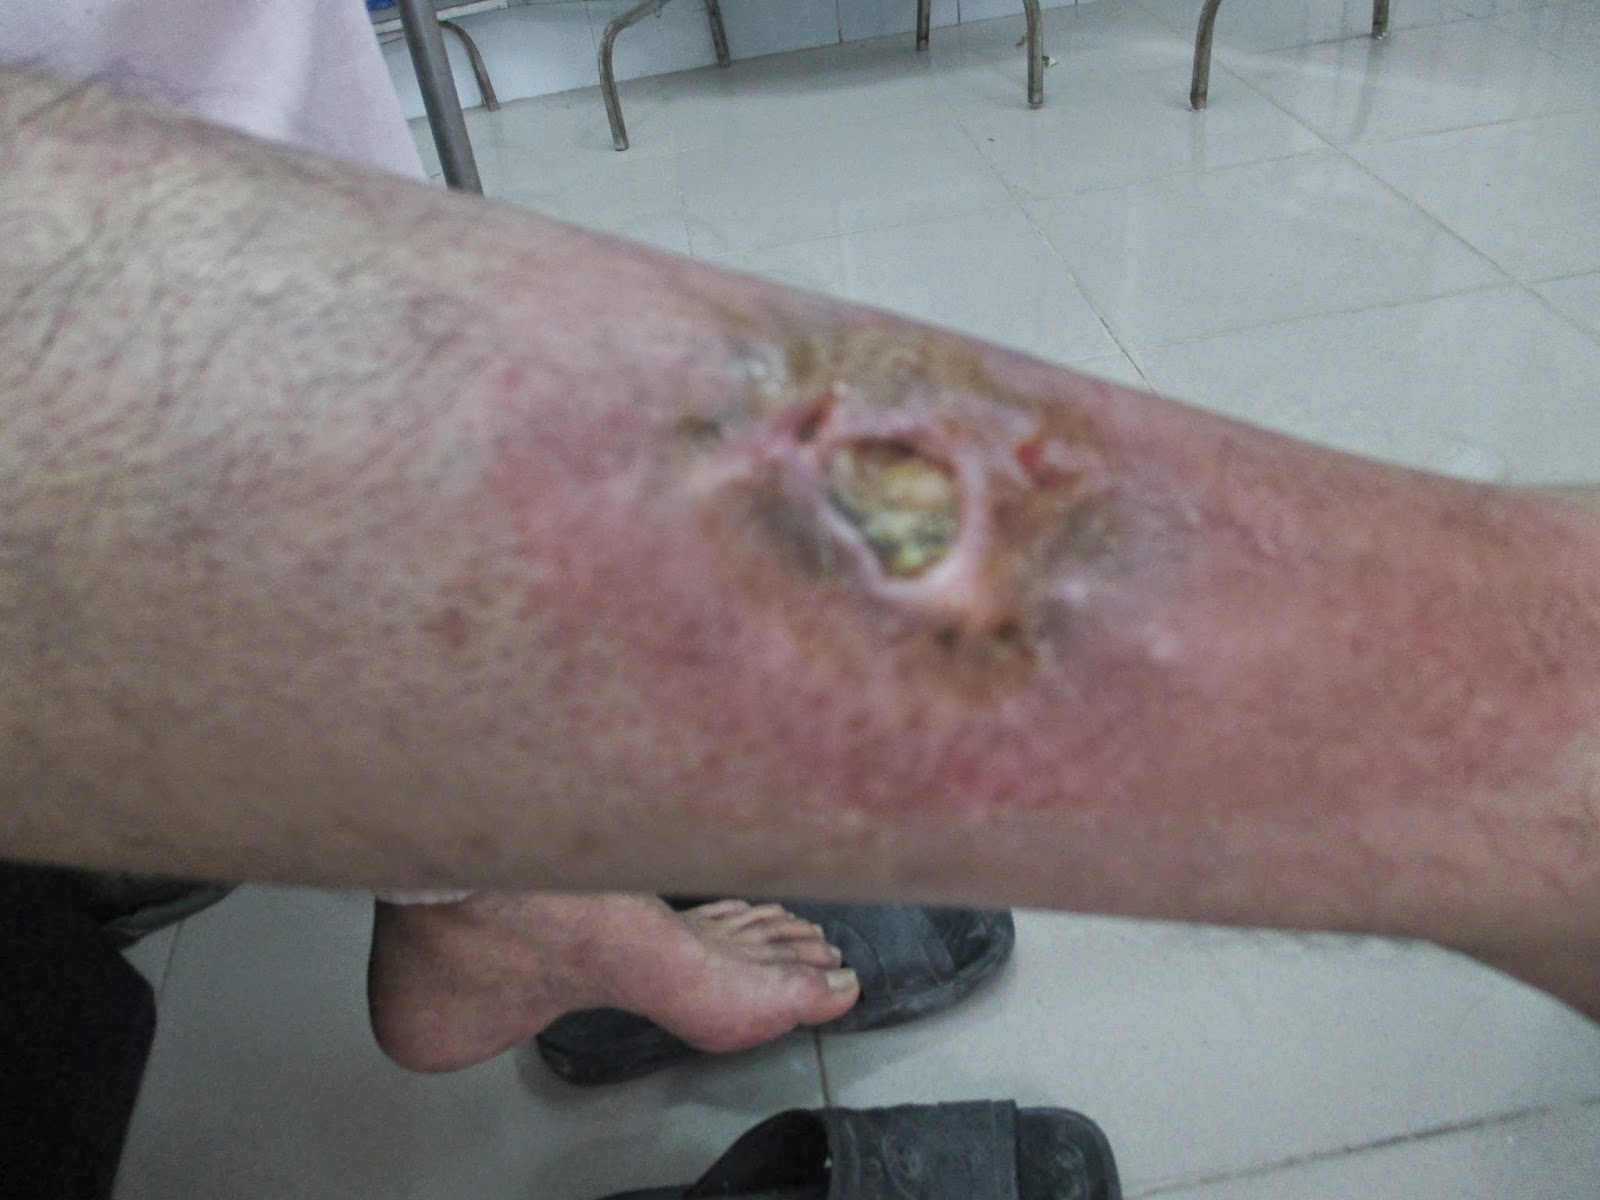 Rx in Vietnam 2014: Bullet Wound from "50" years ago